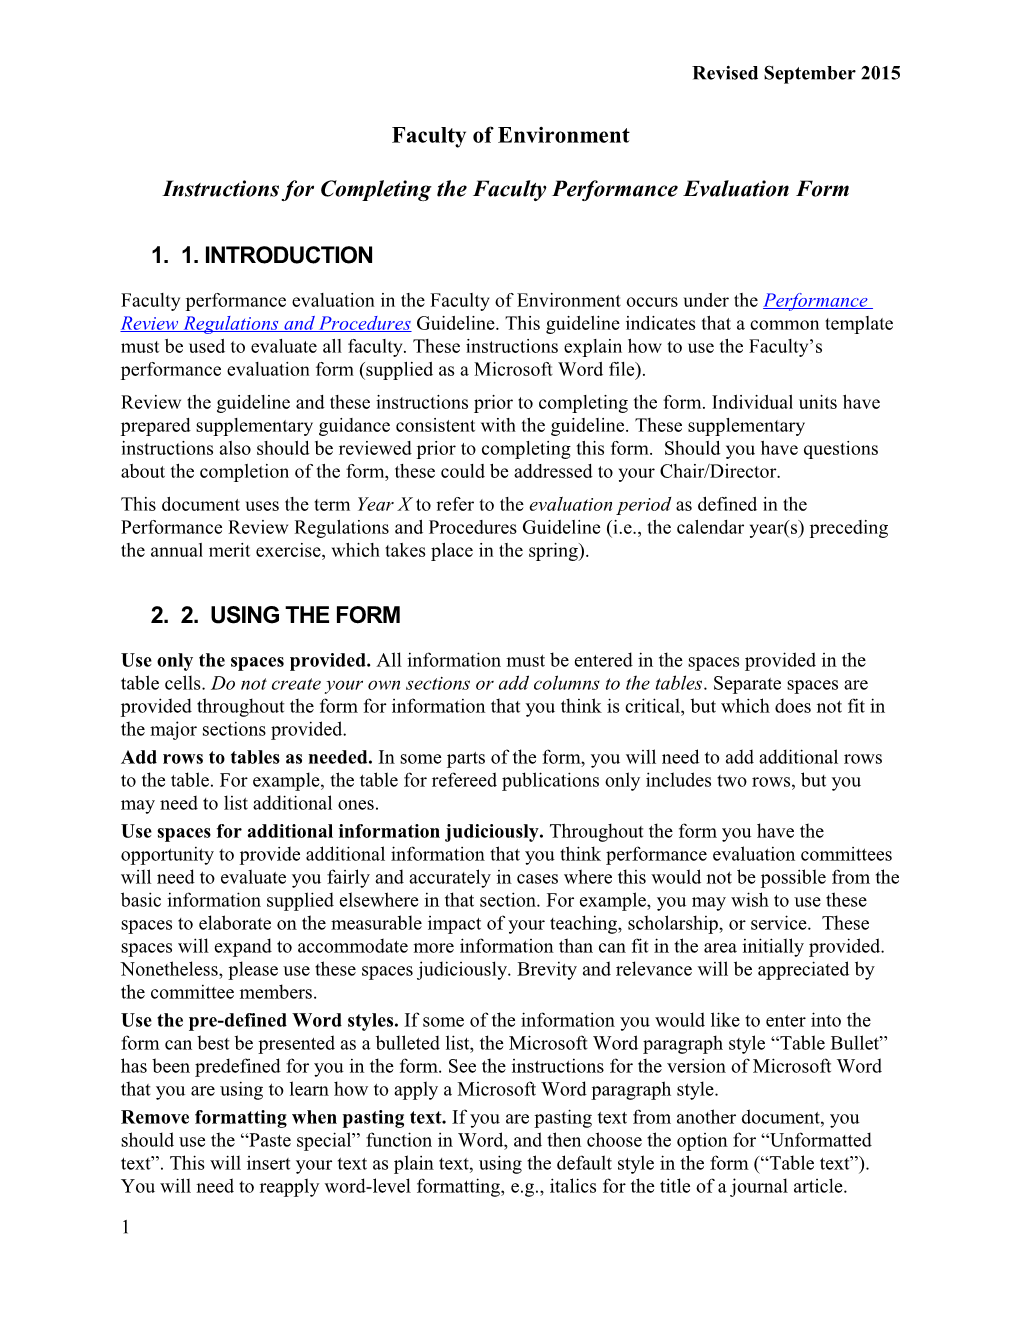 Faculty of Environment Instructions for Completing the Faculty Performance Evaluation Form